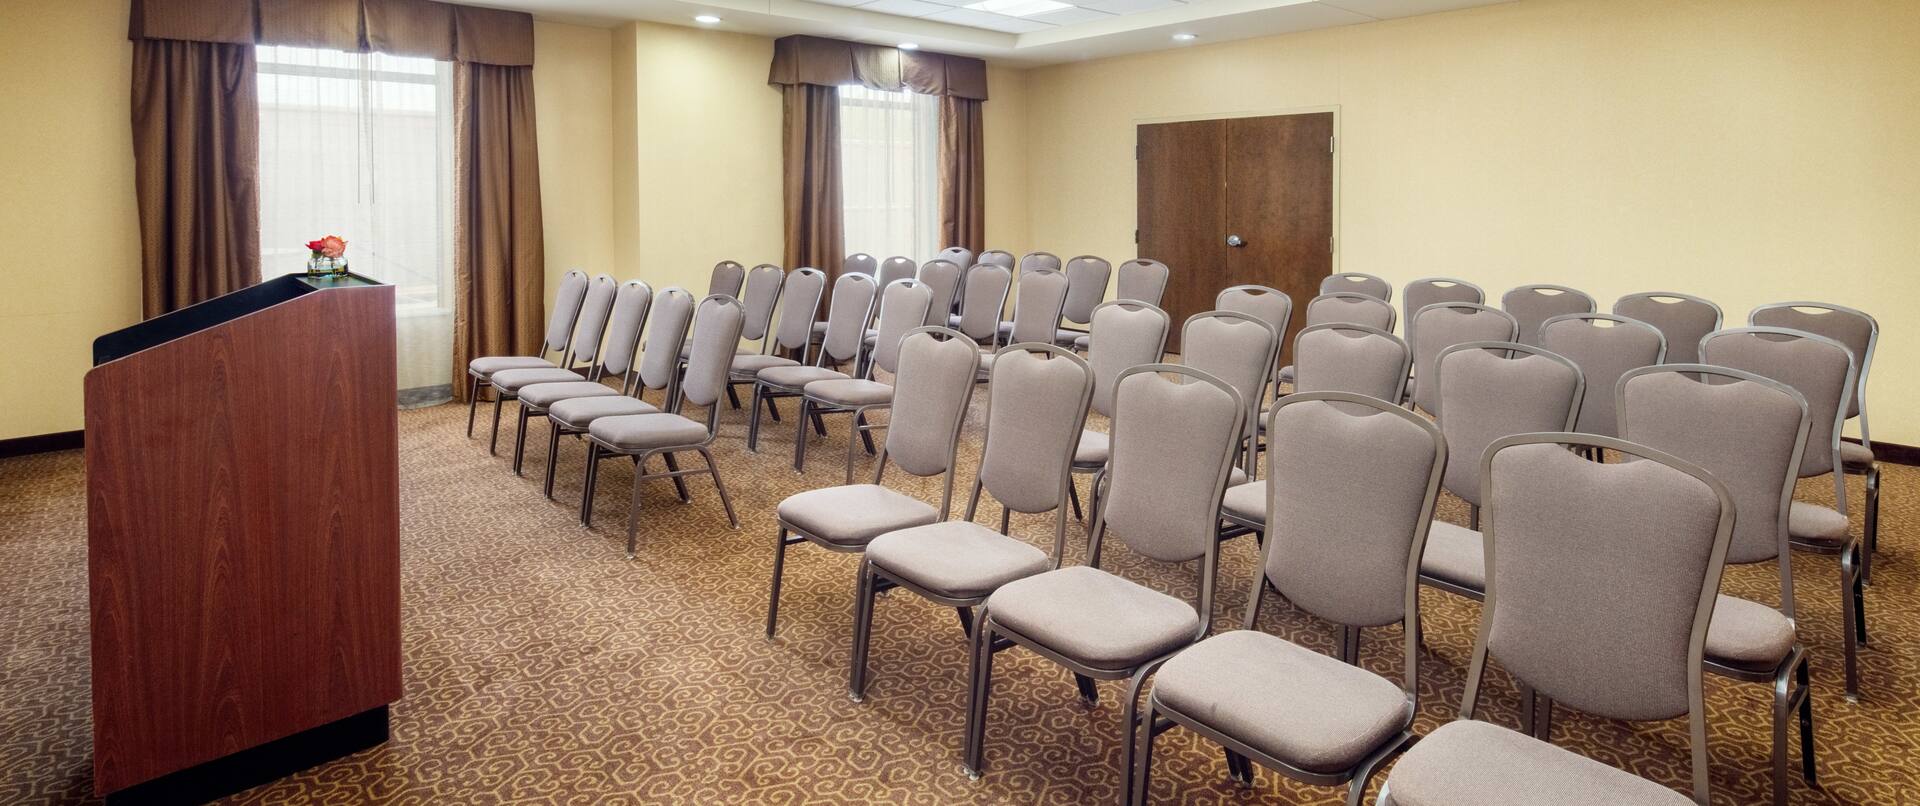 meeting room with rows of chairs